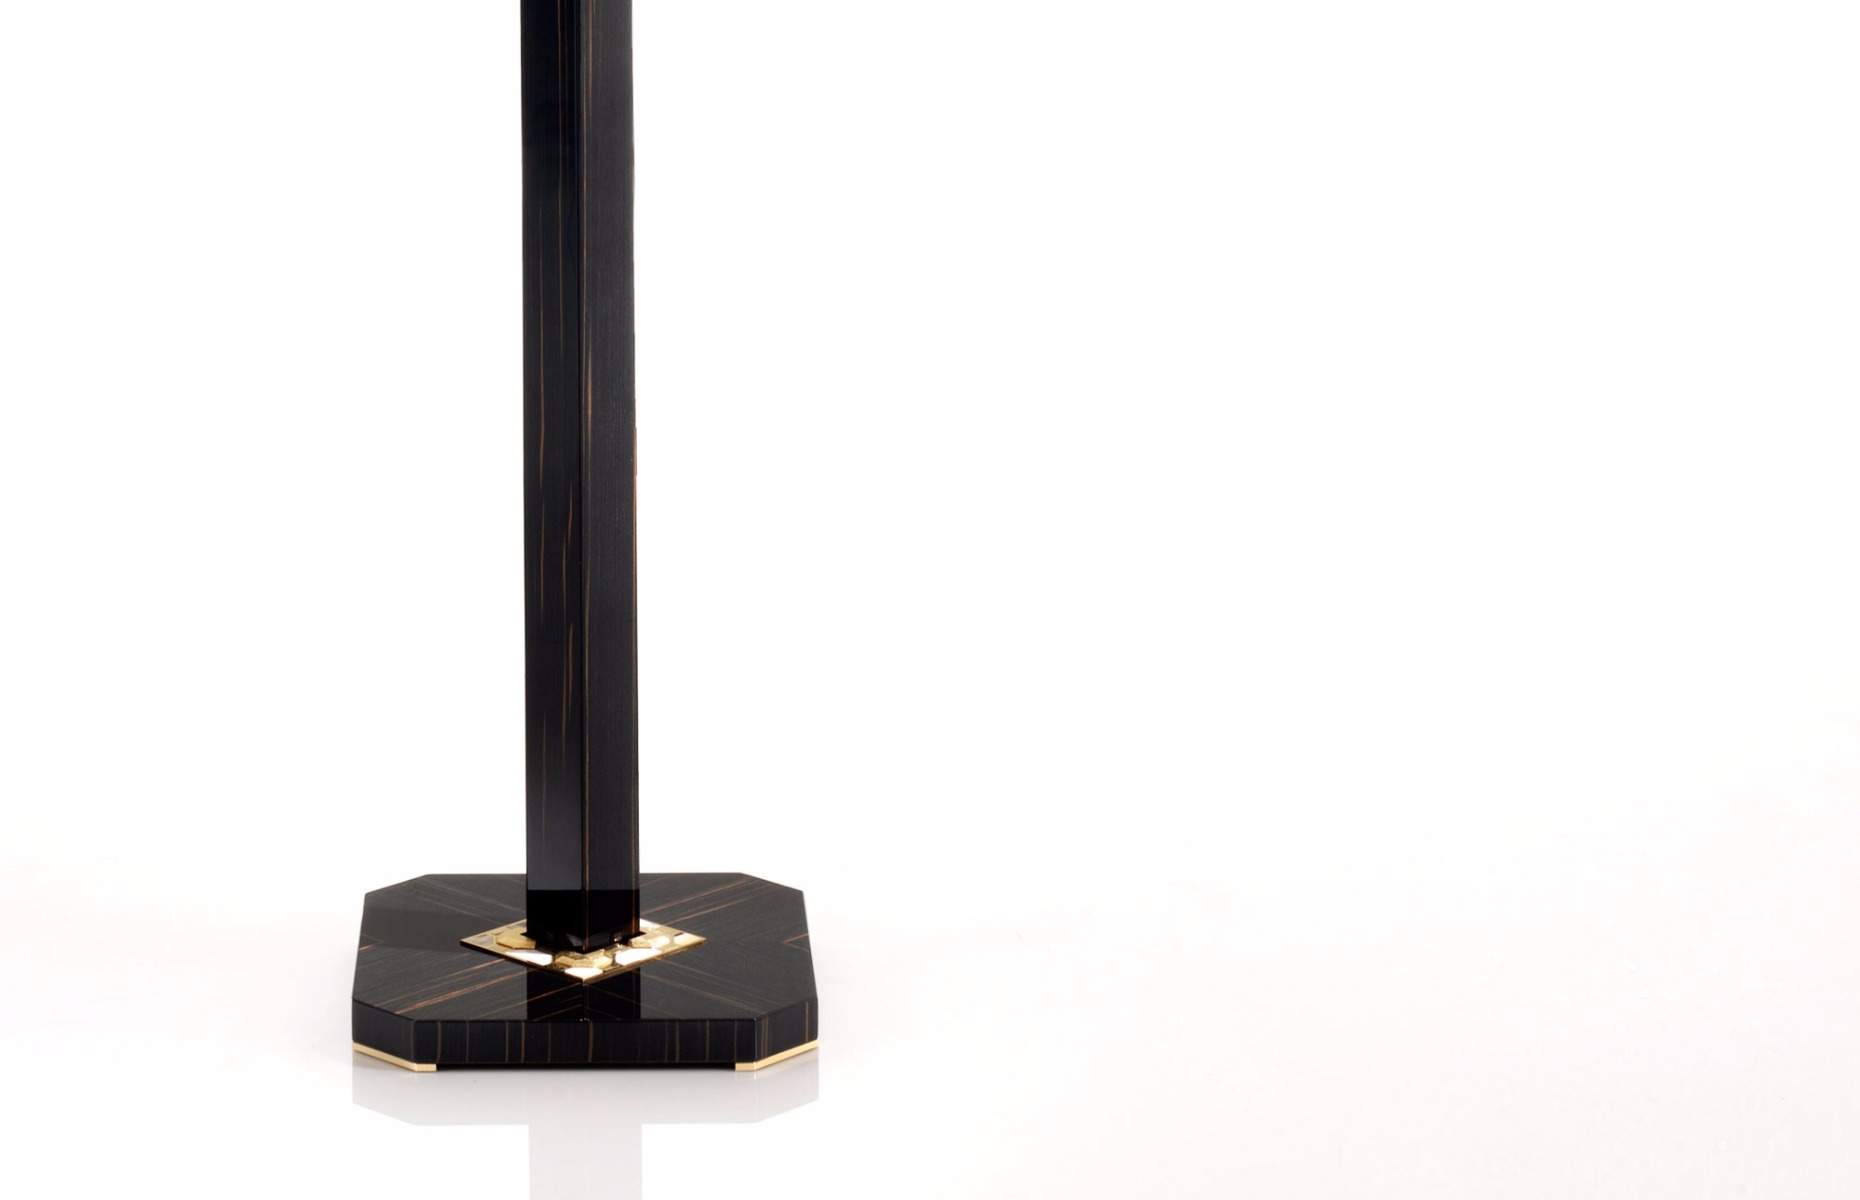 Luxury furniture Lamp with gold detailing at Luxuria London